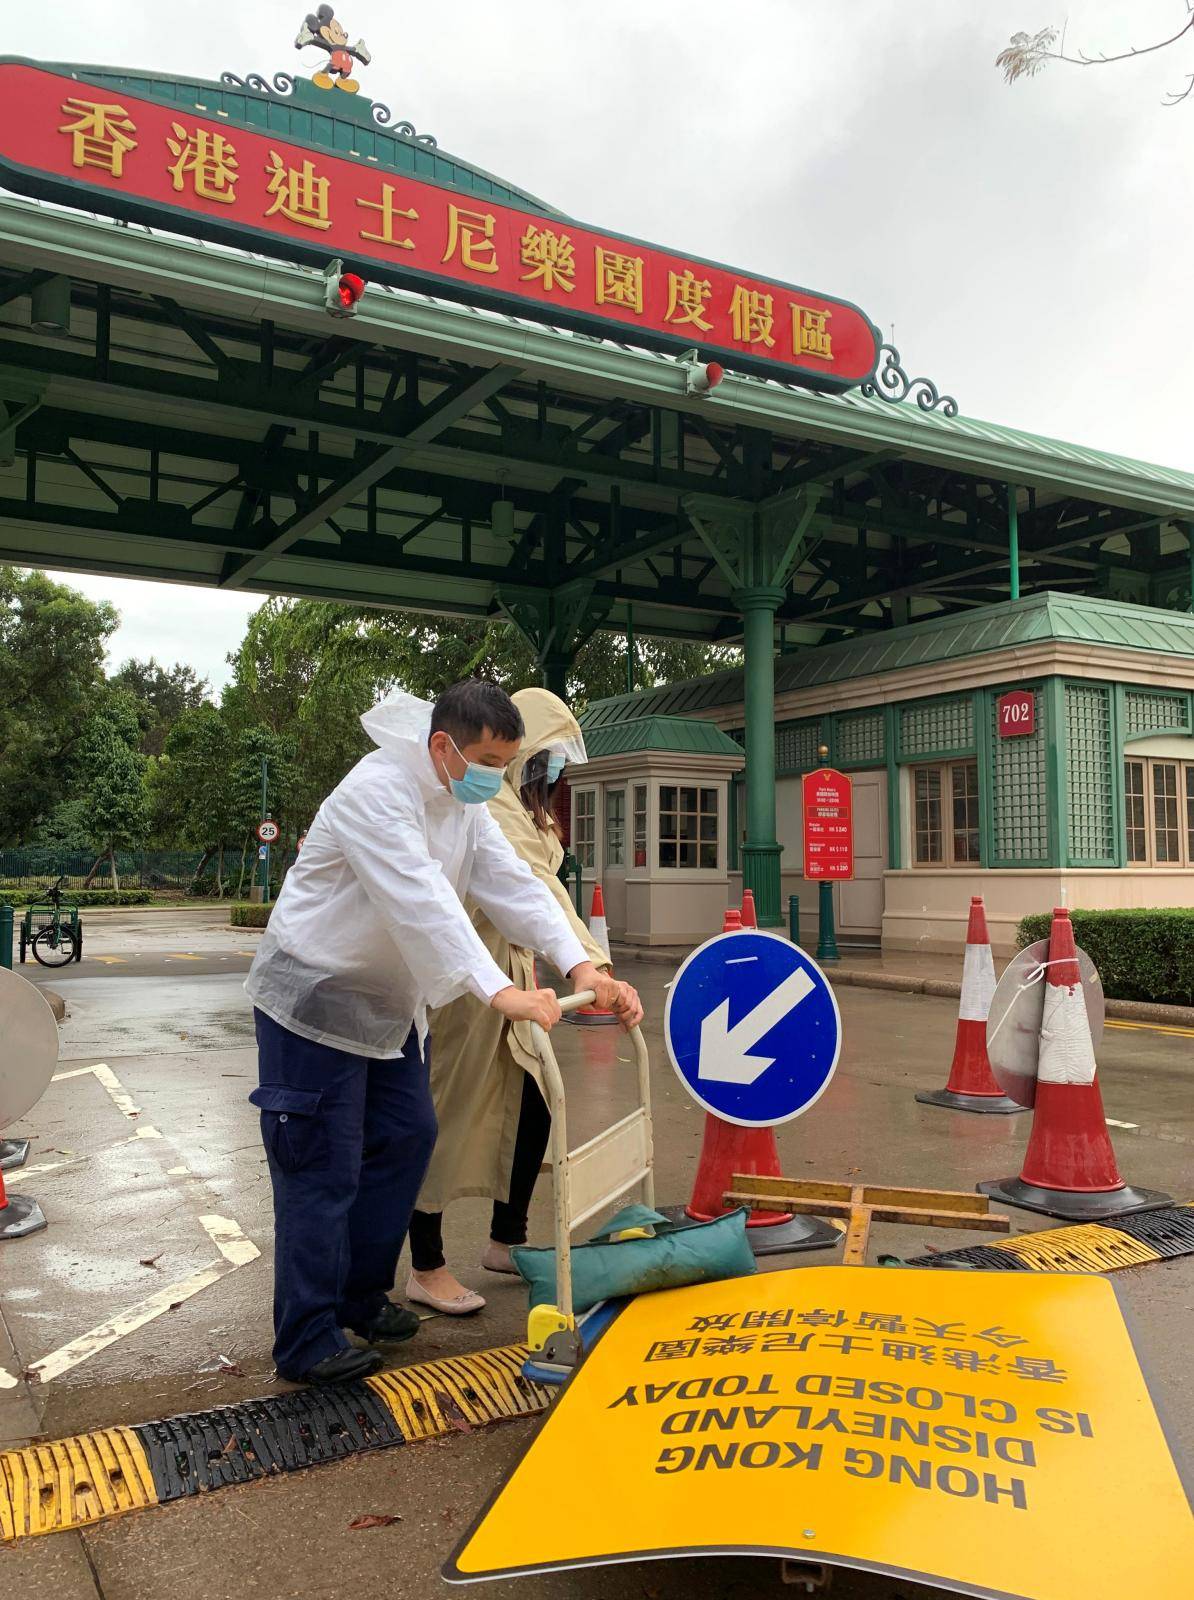 Employees put up a sign outside the Hong Kong Disneyland saying that the theme park has been closed, following the coronavirus outbreak in Hong Kong